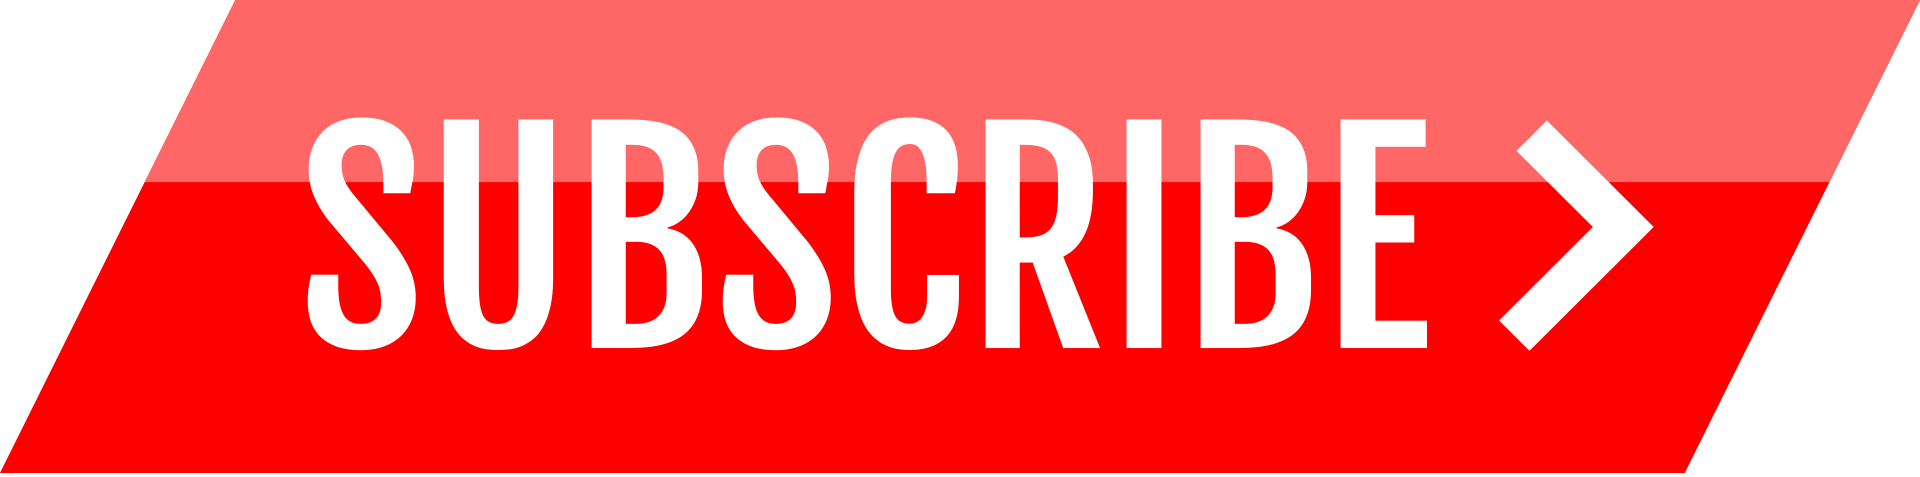 Png Format Youtube Subscribe Button Watermark 150x150